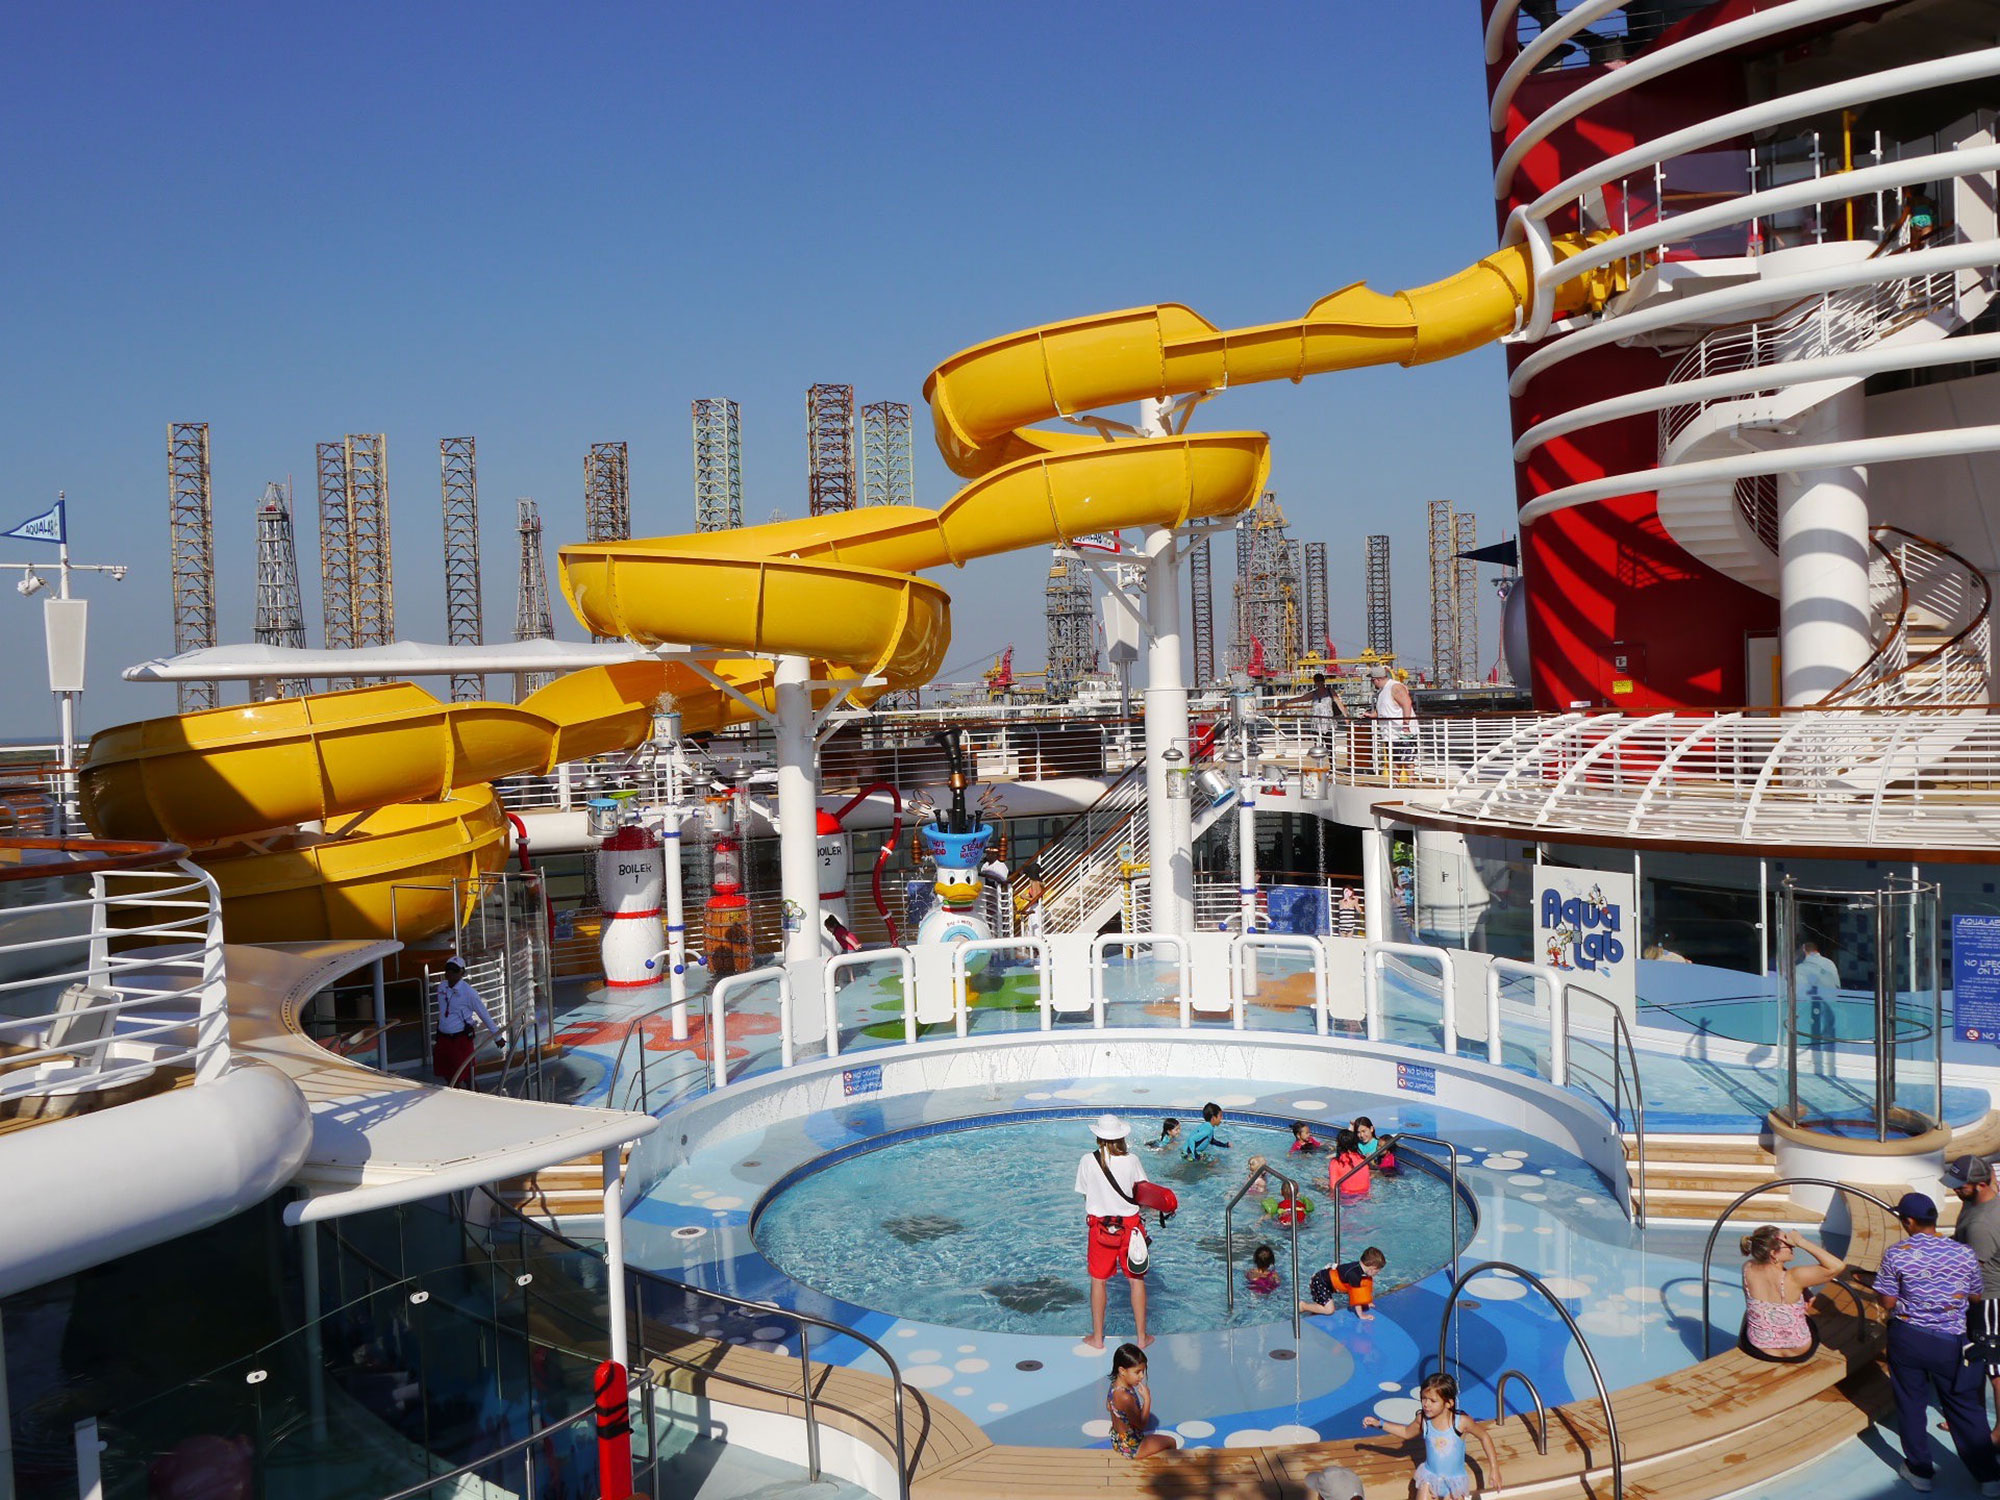 Find out what's new and changed on the Disney Wonder Reimagined after its drydock renovations! |PassPorter.com